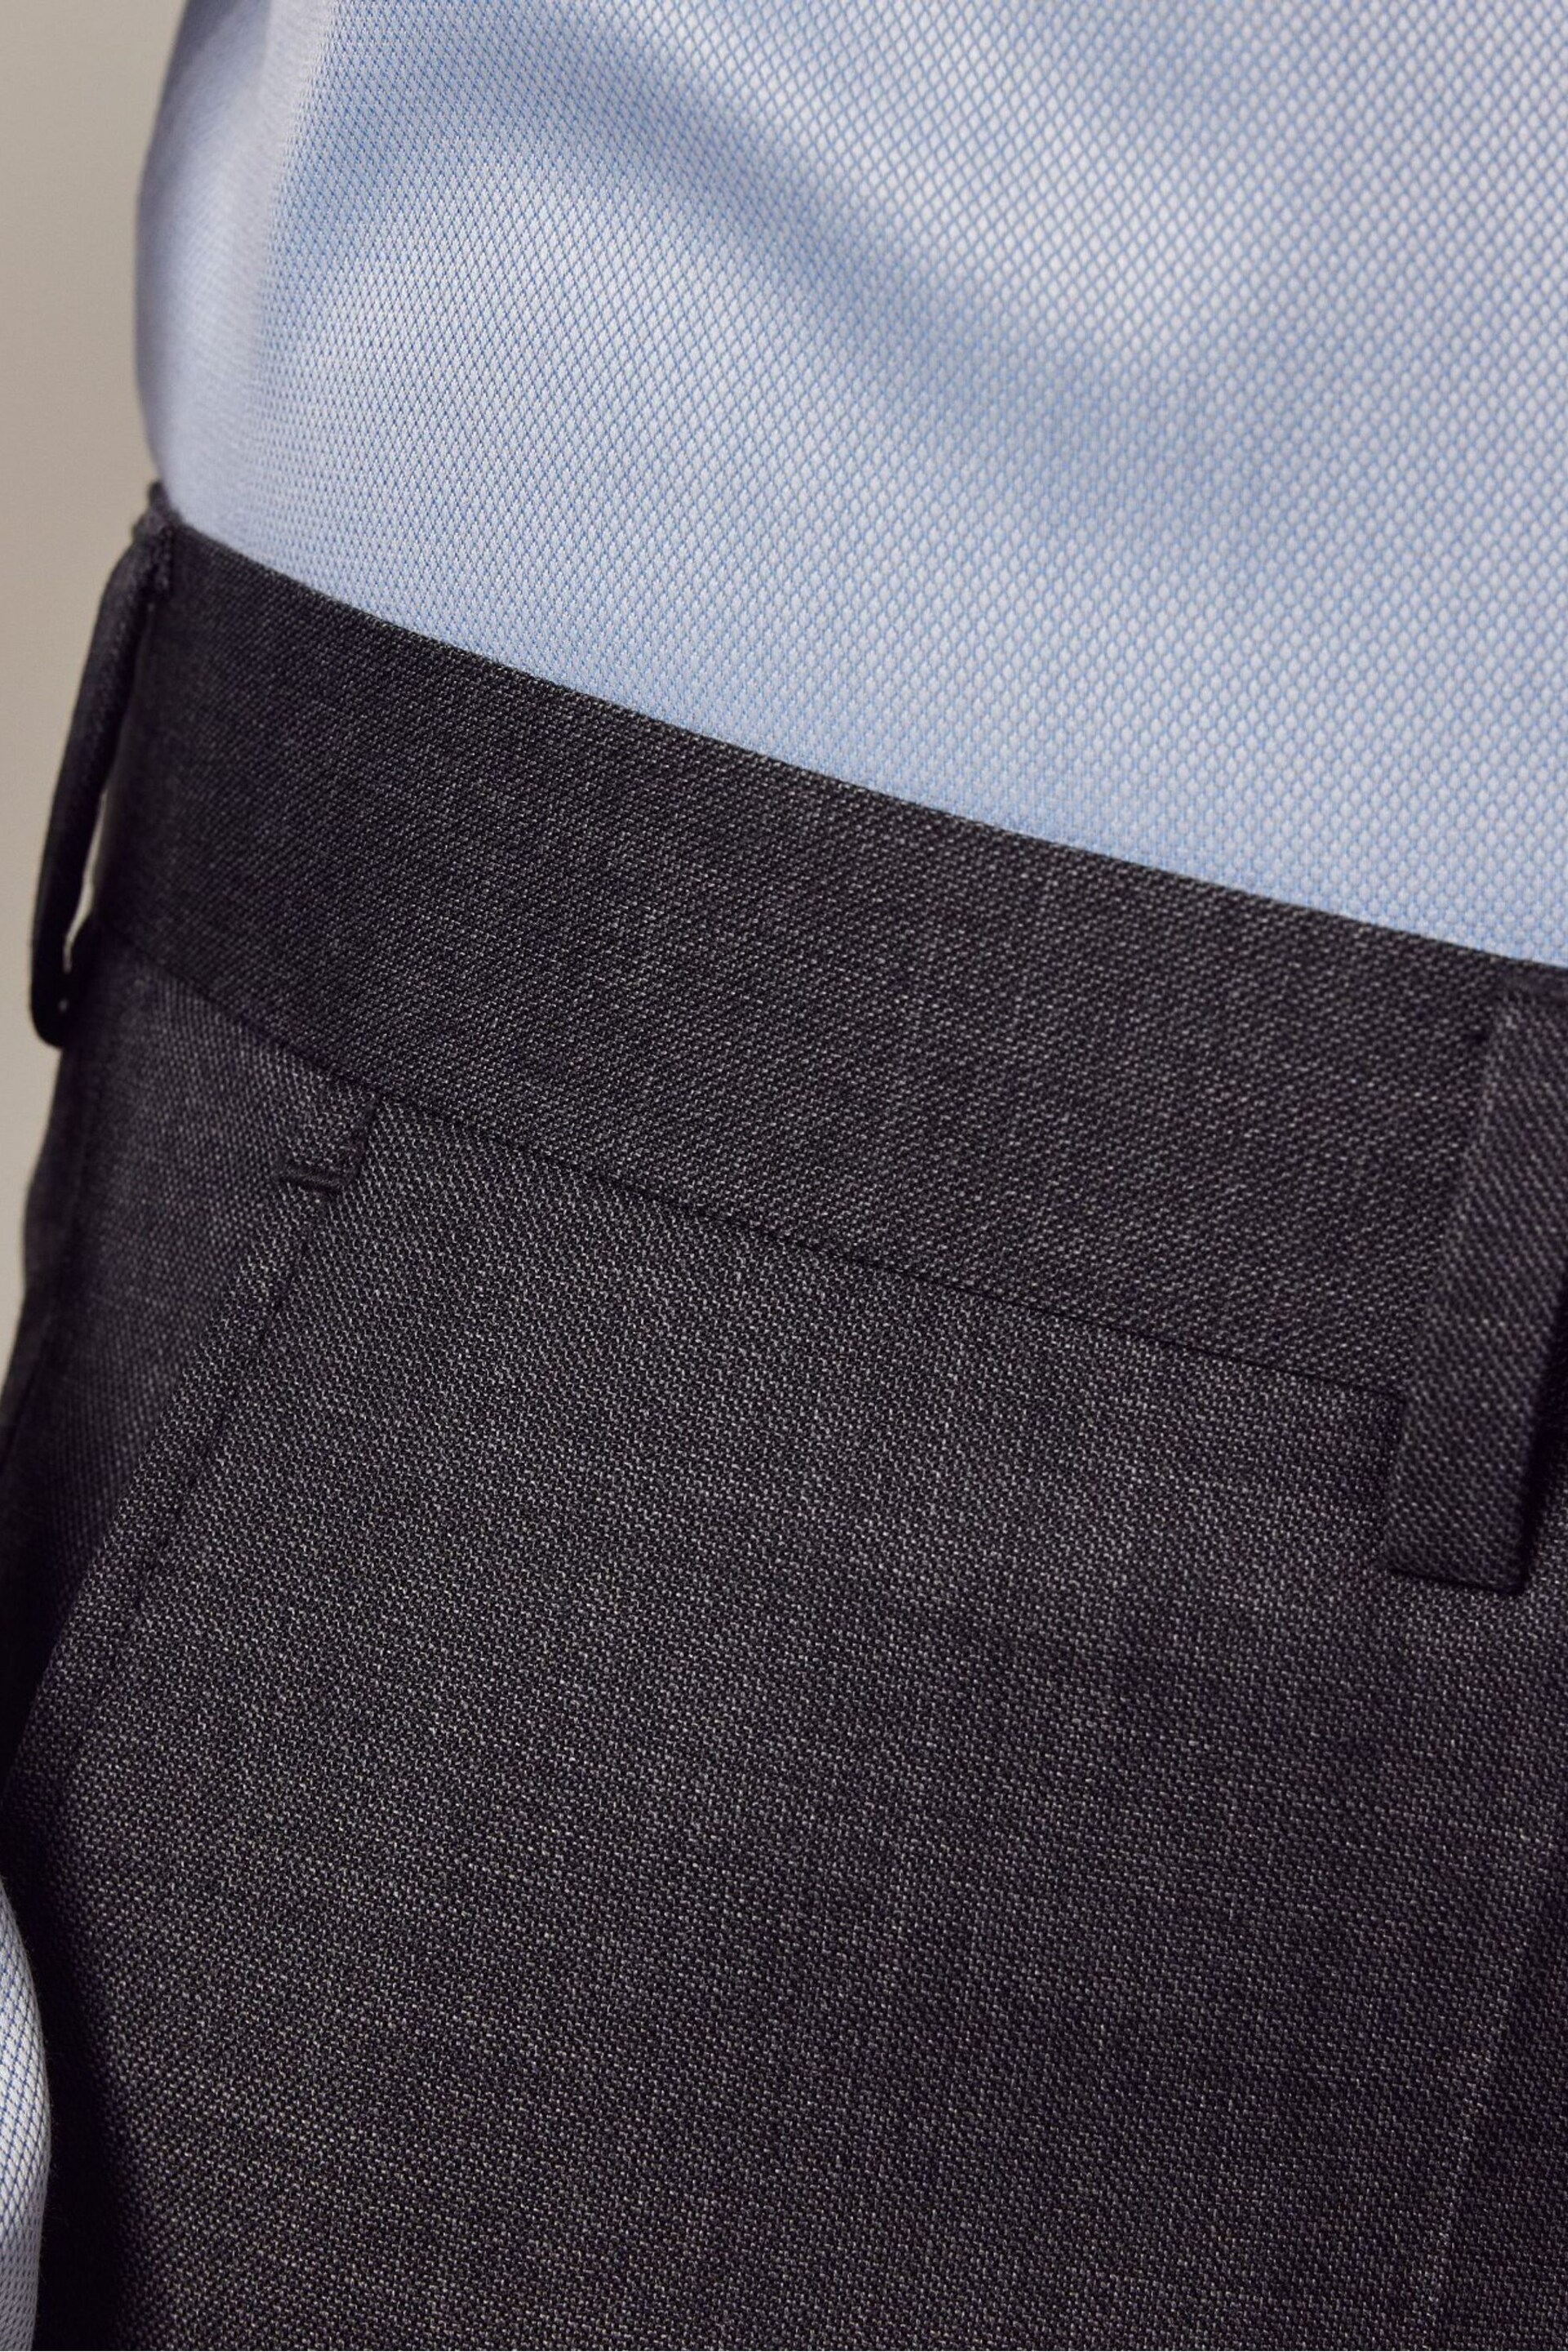 Hawes & Curtis Slim Grey Twill Suit Trousers - Image 3 of 3